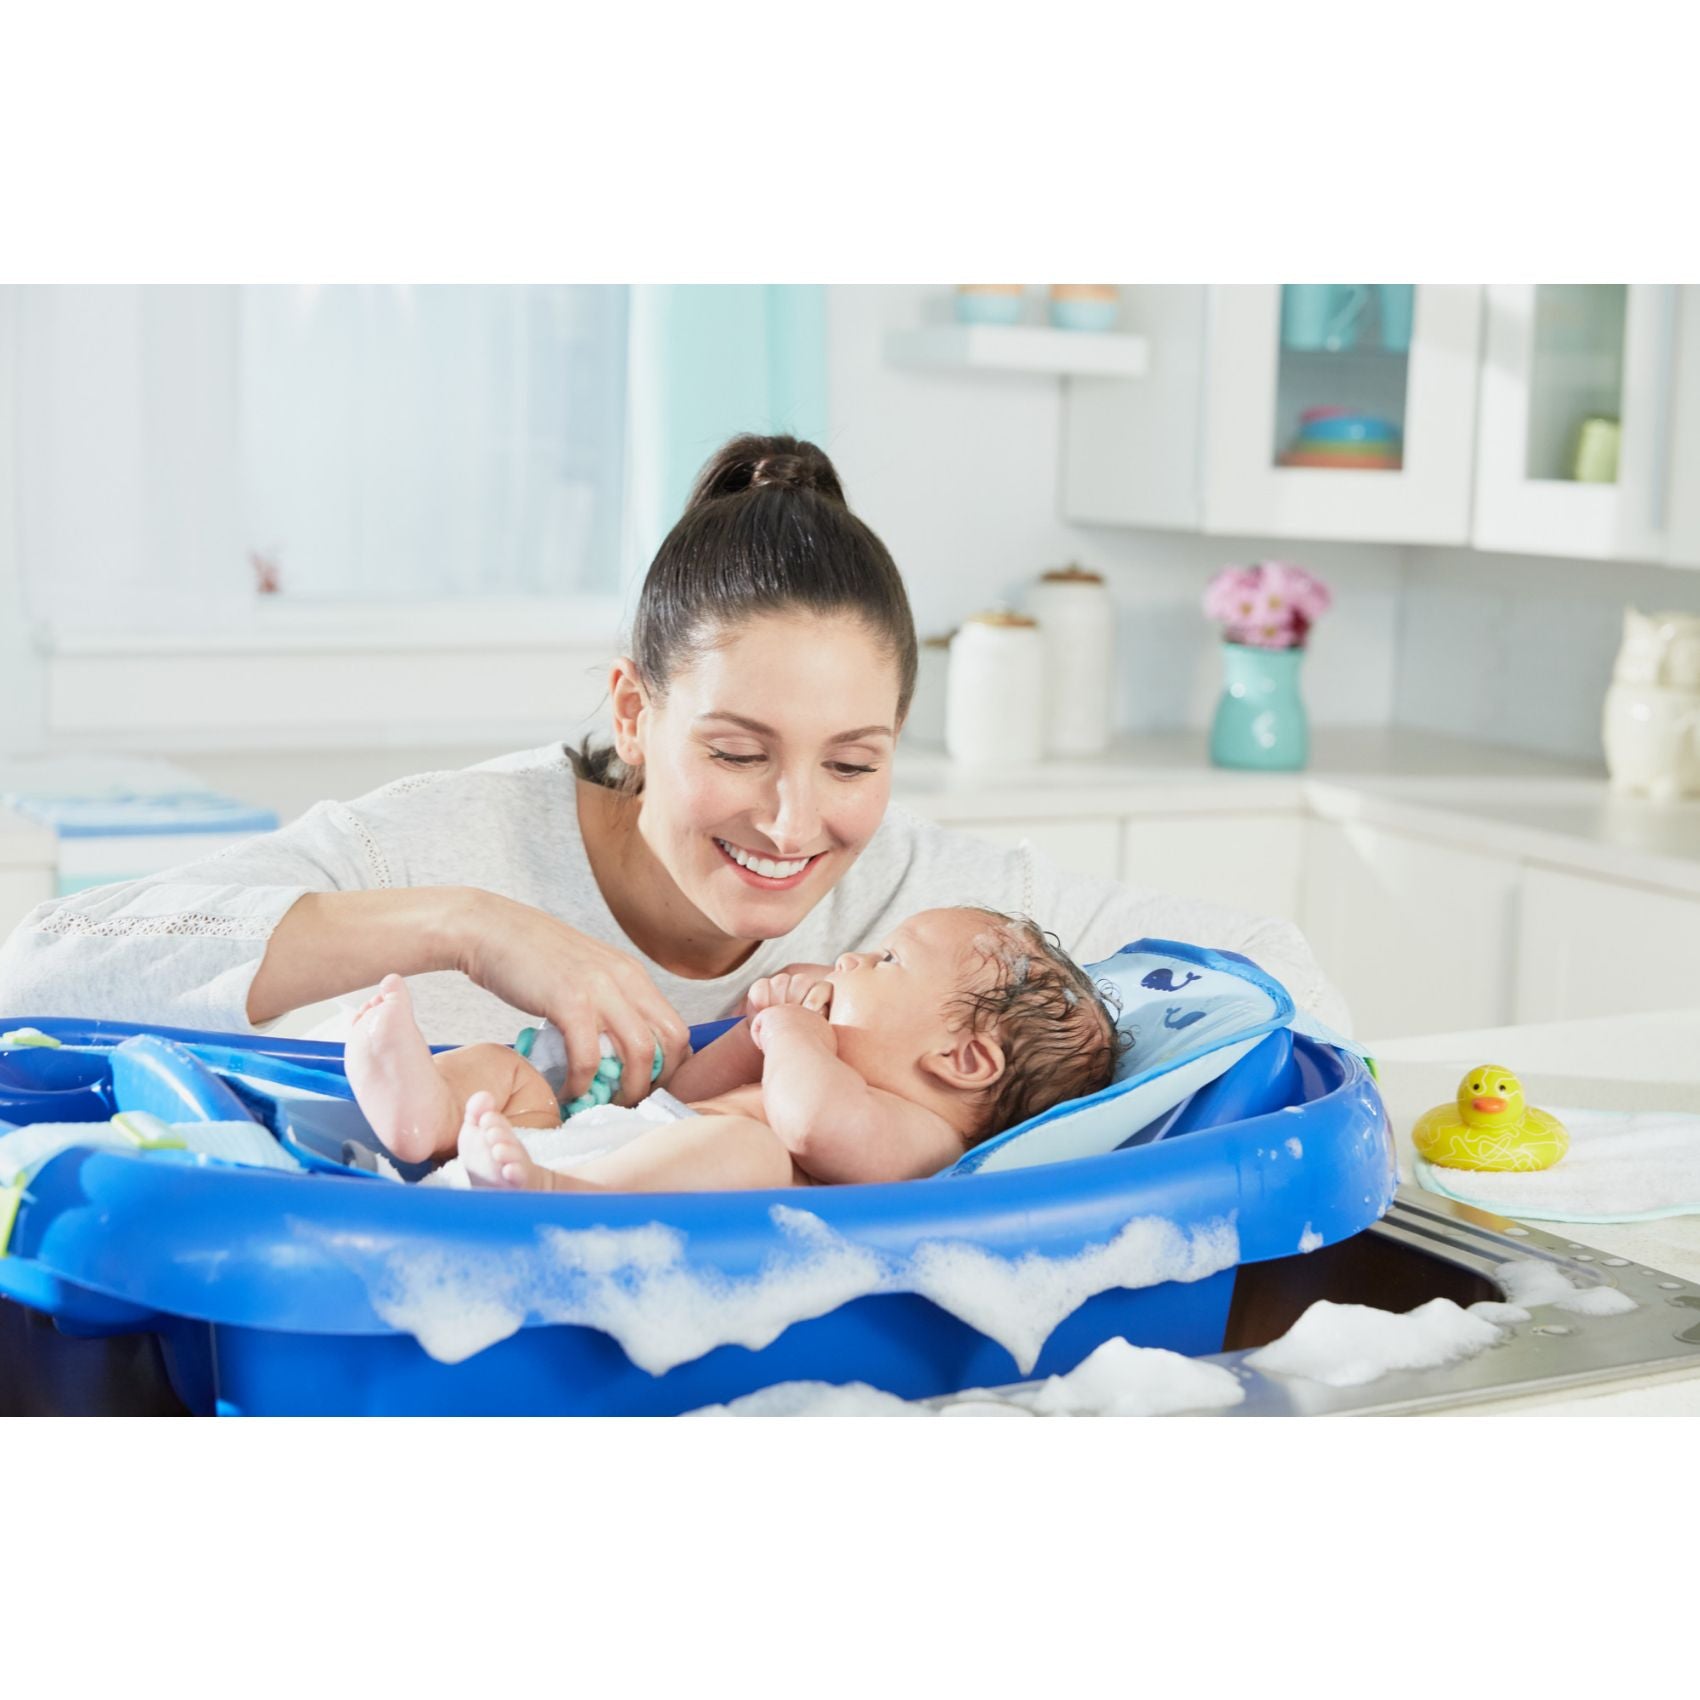 The First Years -Sure Comfort Tub (Blue/Whale Sling)